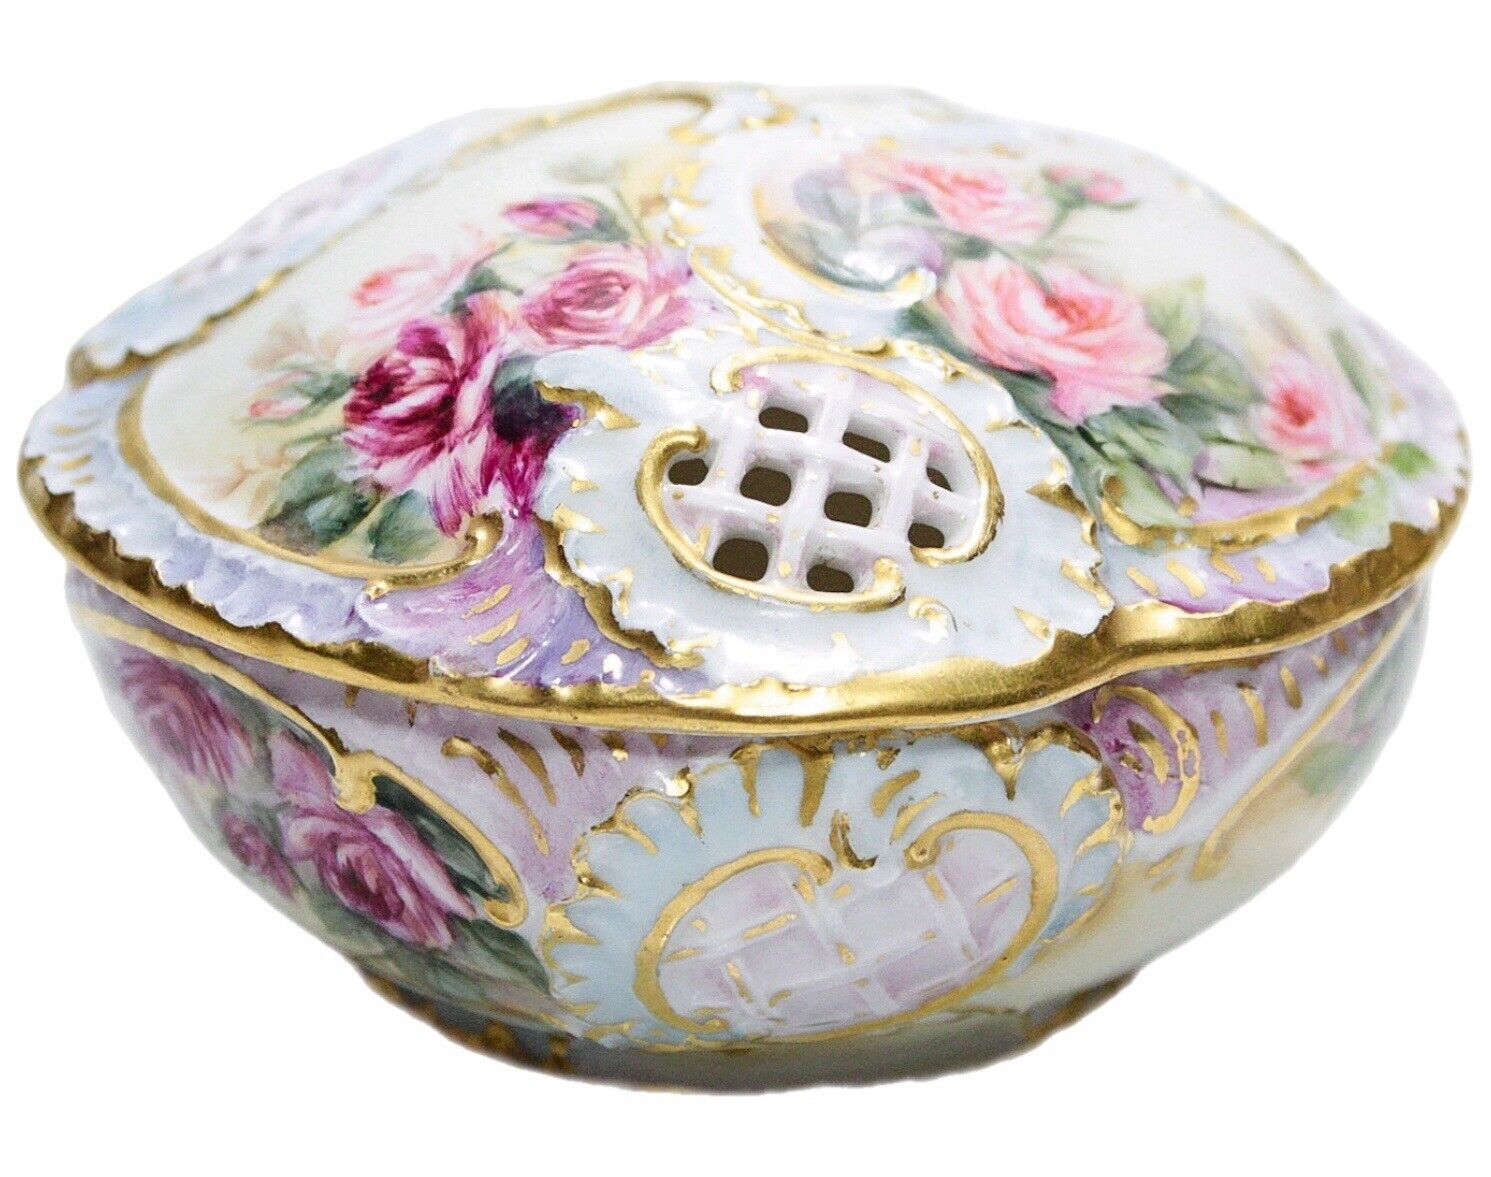 Antique Hand Painted Hallmarked Floral Gilt Reticulated Porcelain Powder Box